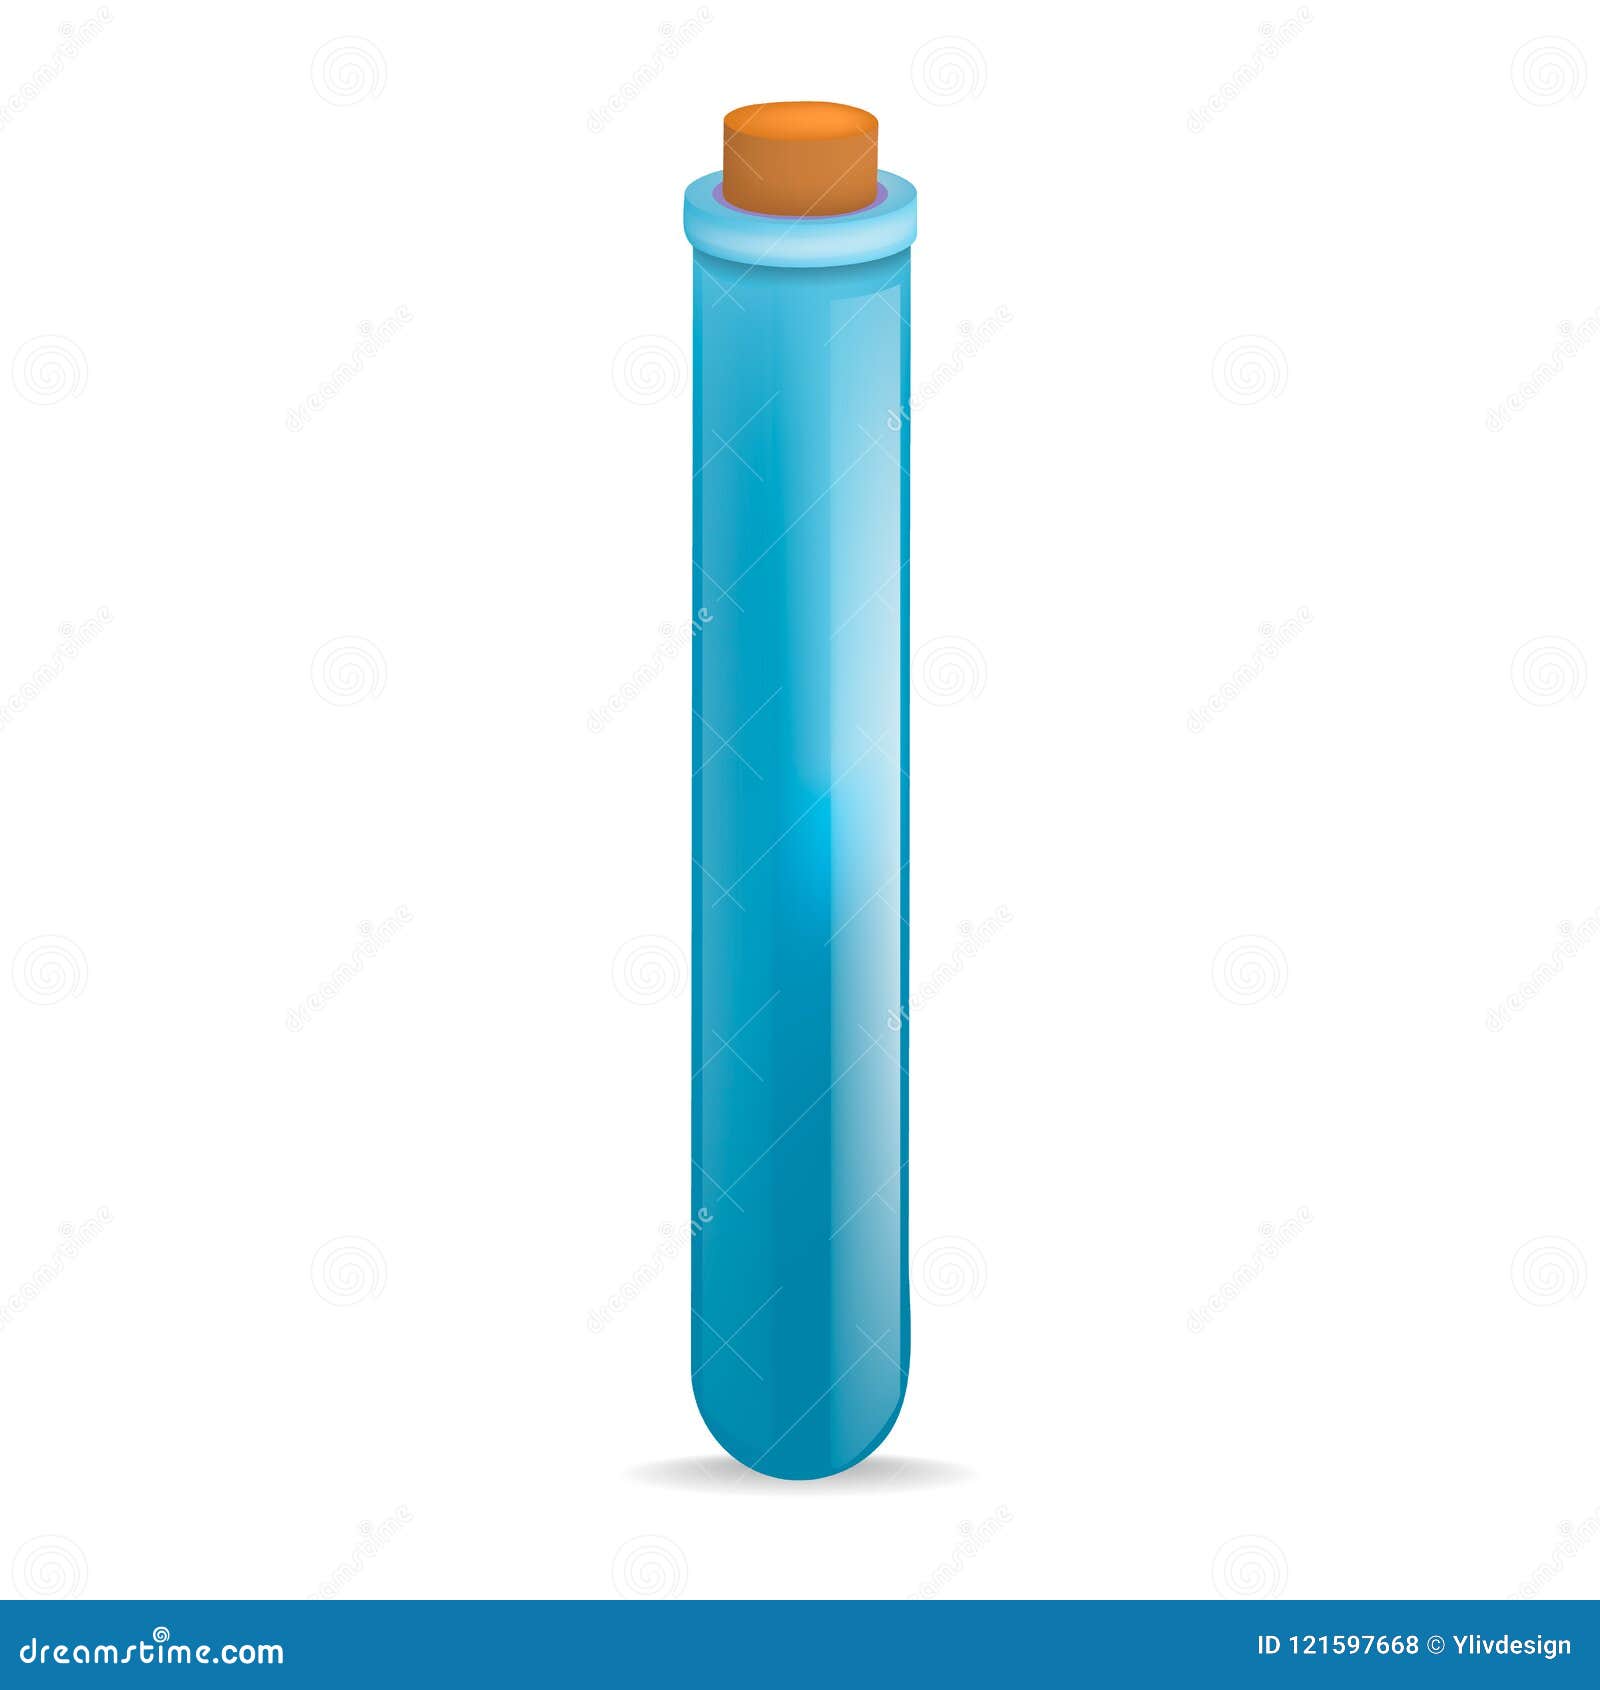 Download Blue Test Tube Mockup, Realistic Style Stock Vector - Illustration of illustration, glass: 121597668